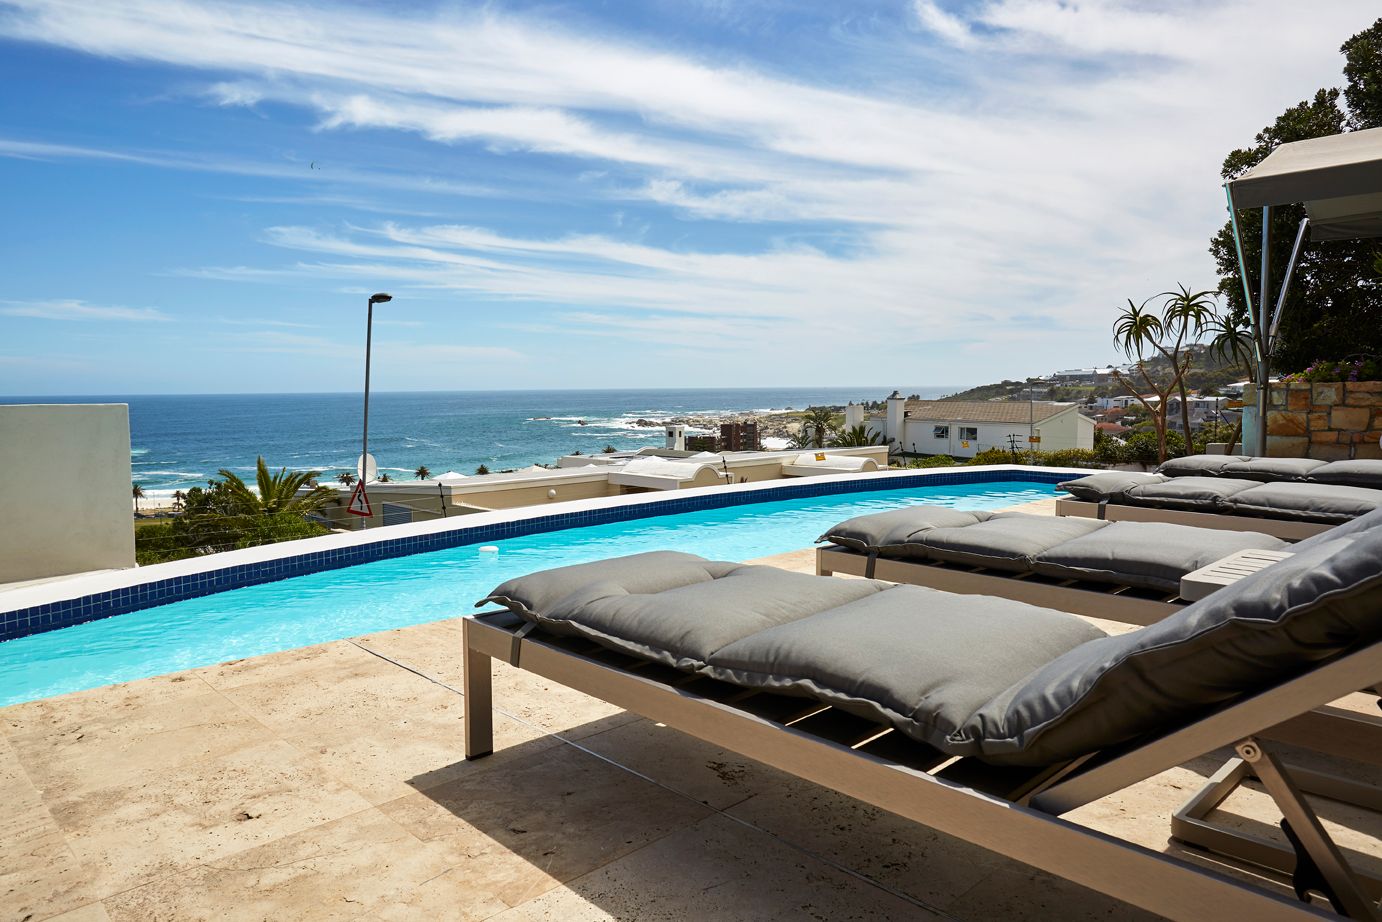 Photo 1 of Villa Waves accommodation in Camps Bay, Cape Town with 4 bedrooms and 4 bathrooms